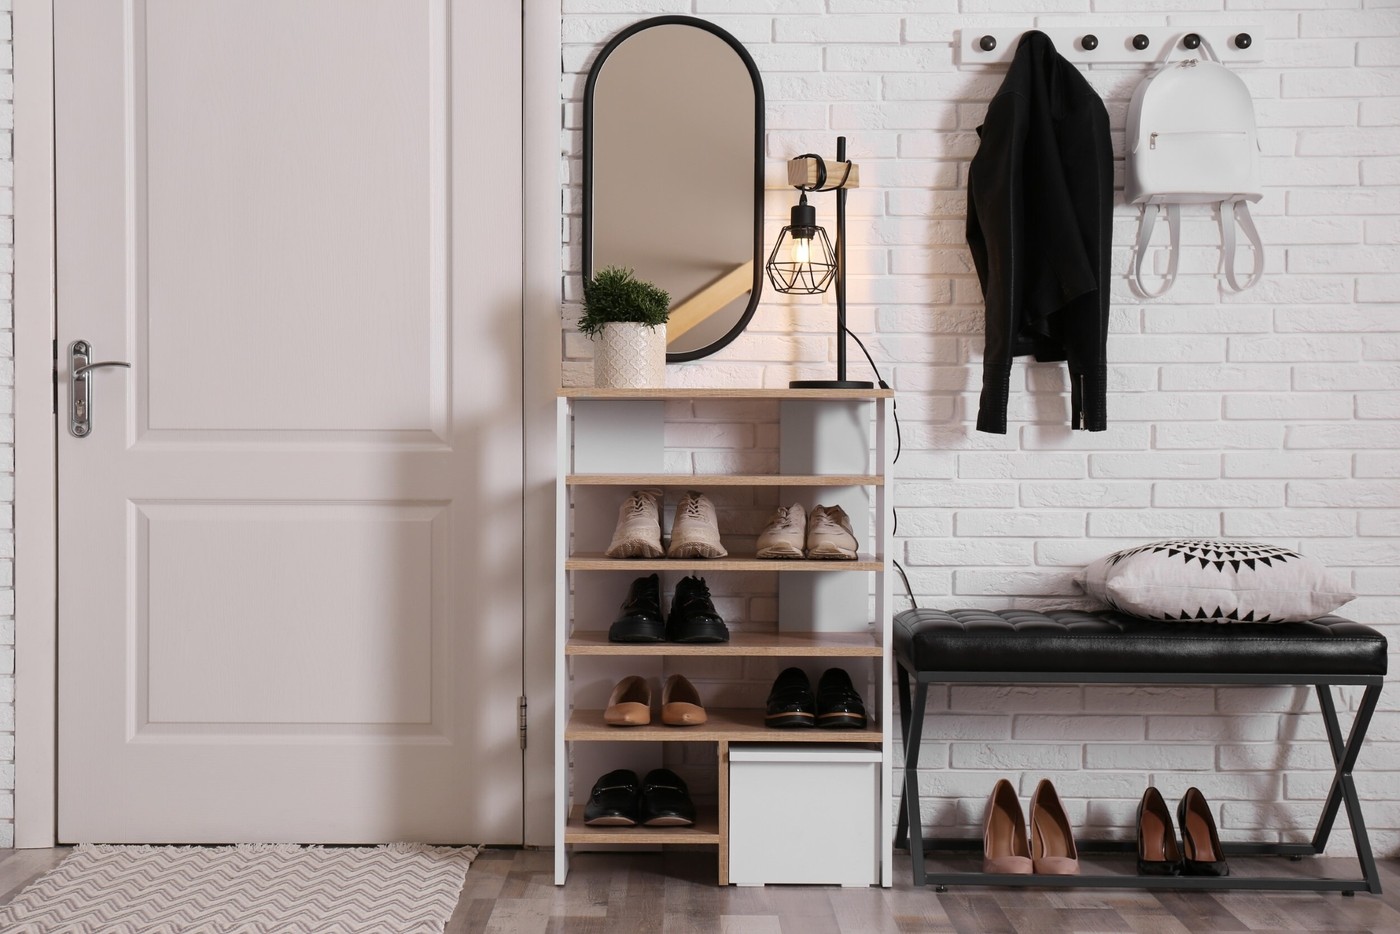 Shelving unit with shoes and different accessories near white brick wall in hall. Storage idea